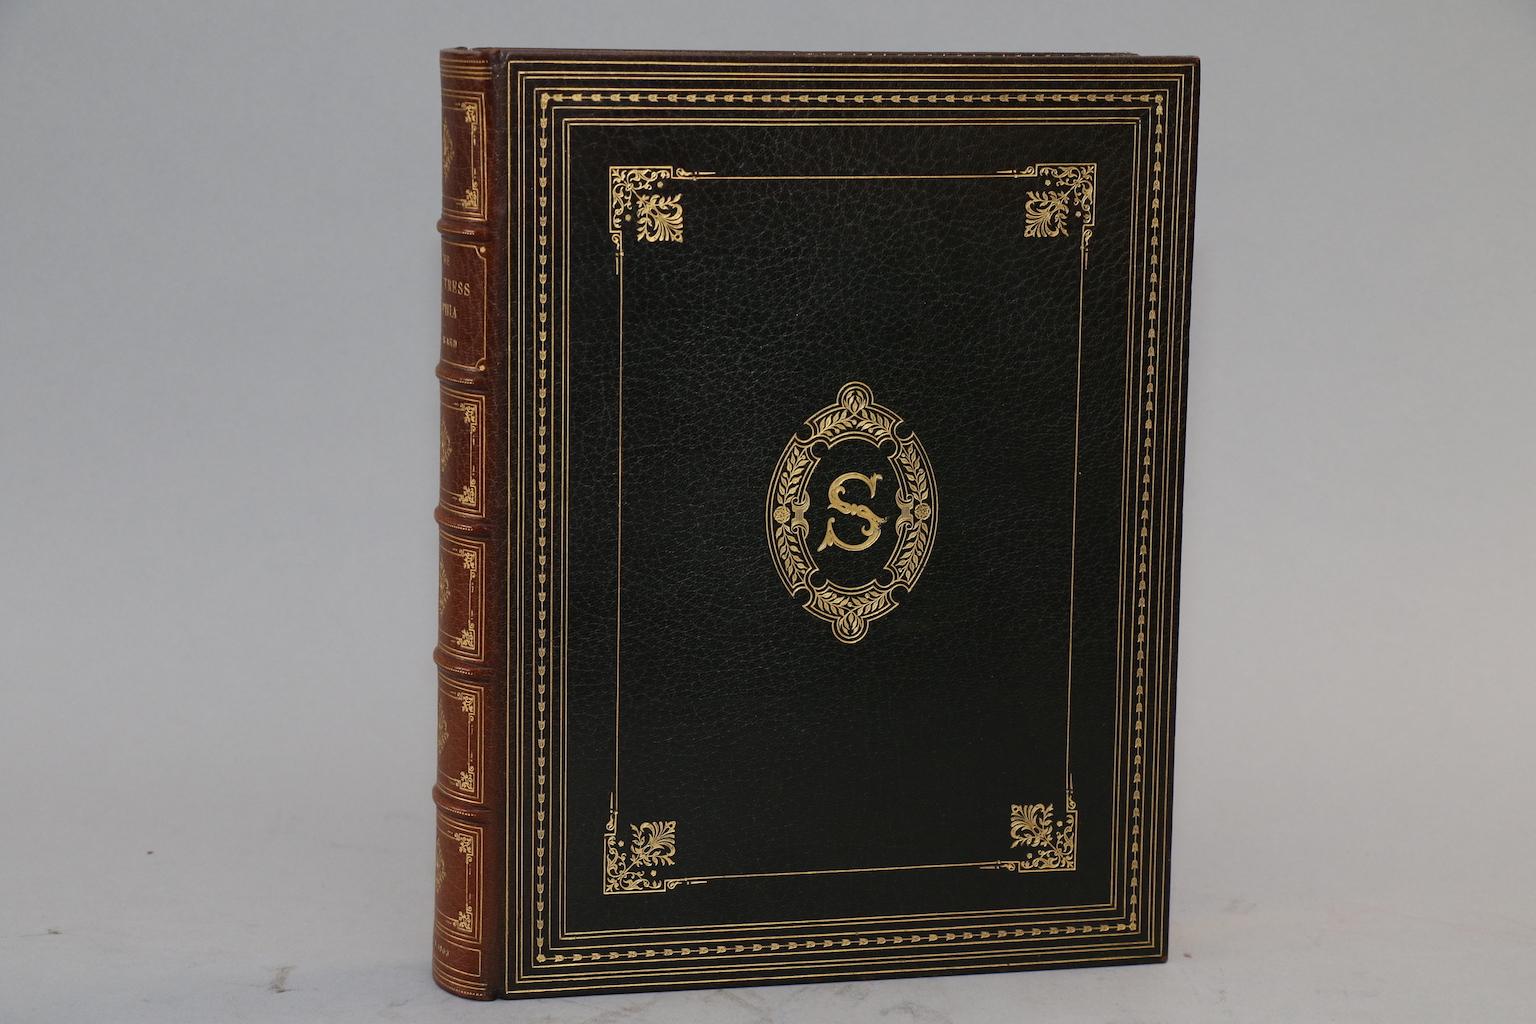 1 volume. Folio. Bound in full green Morocco by Birdsall, with all edges gilt and ornate gilt on covers & spine, as well as a hand-colored frontispiece. Printed on fine paper. Profusely illustrated. Published in London, Paris, & New York by Goupil &